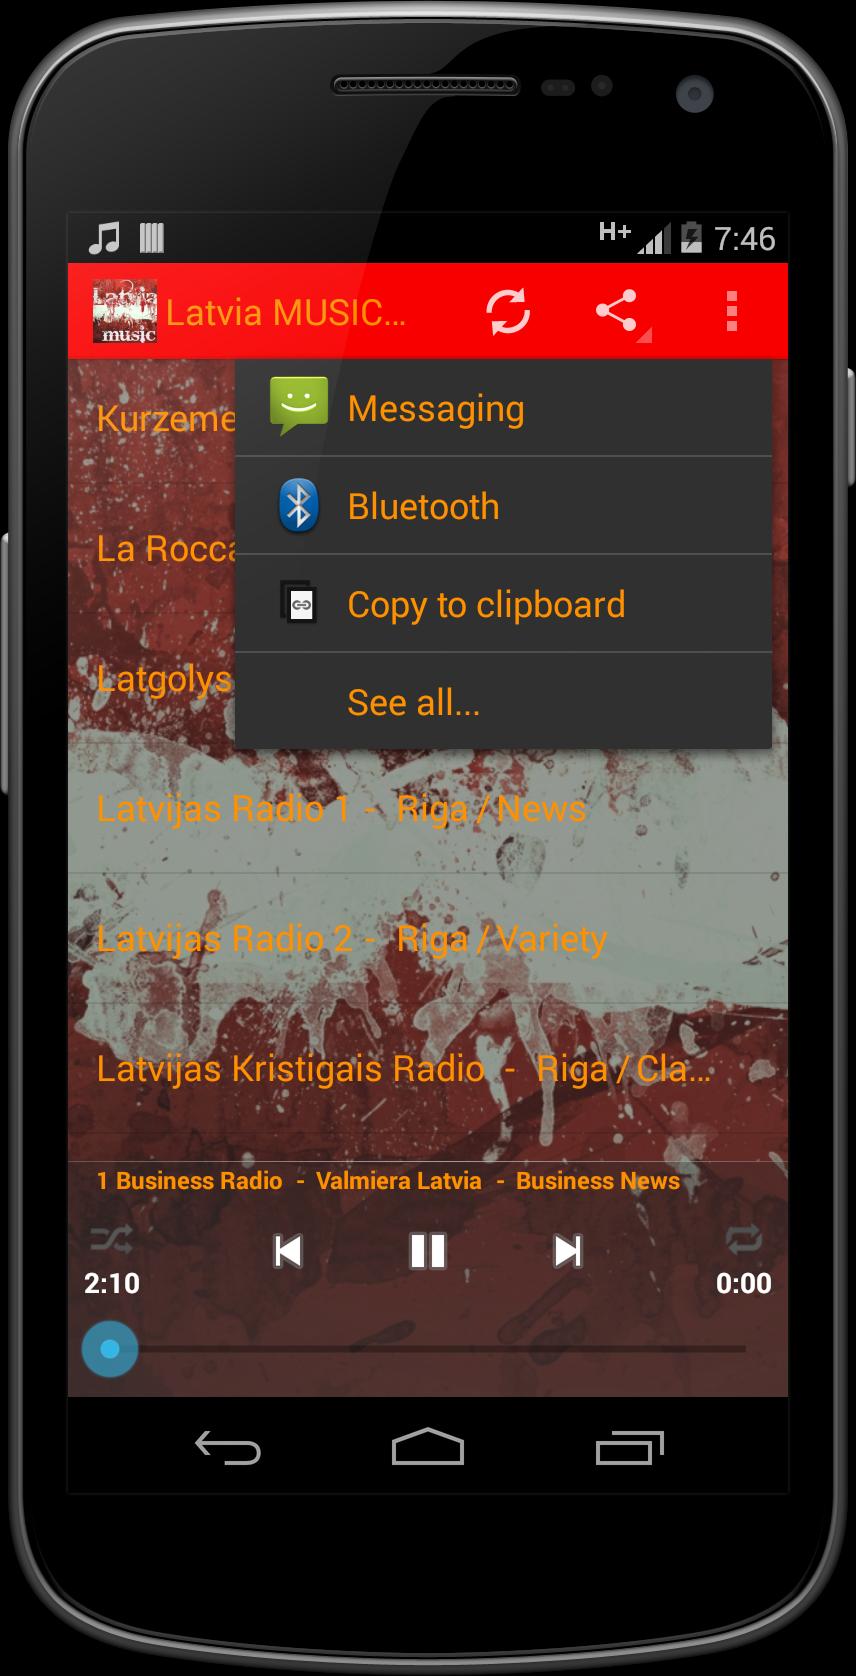 Latvia MUSIC Radio for Android - APK Download